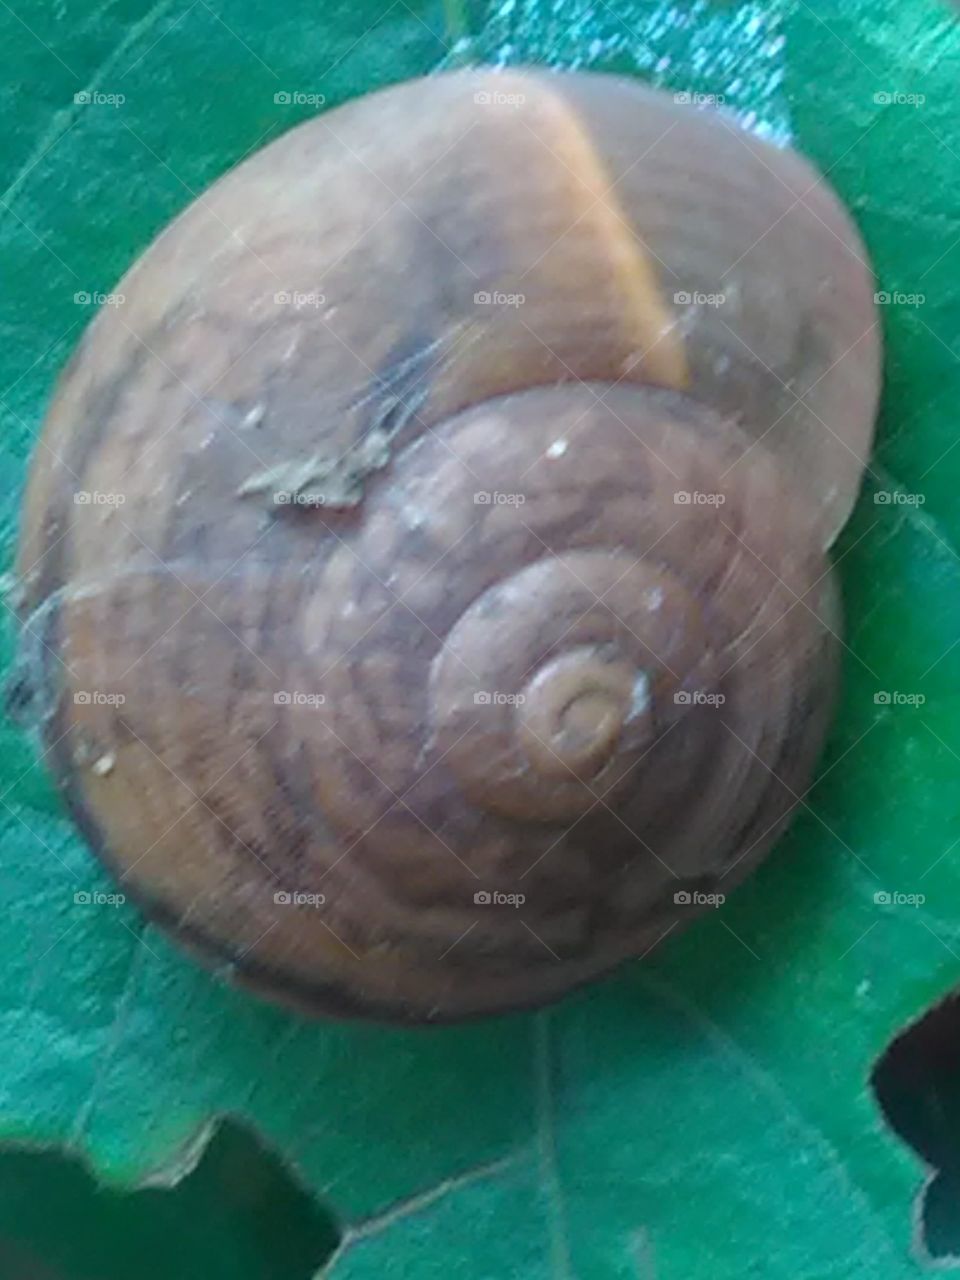 This is a very beautiful 🐌 snail 🐌 on the forest.